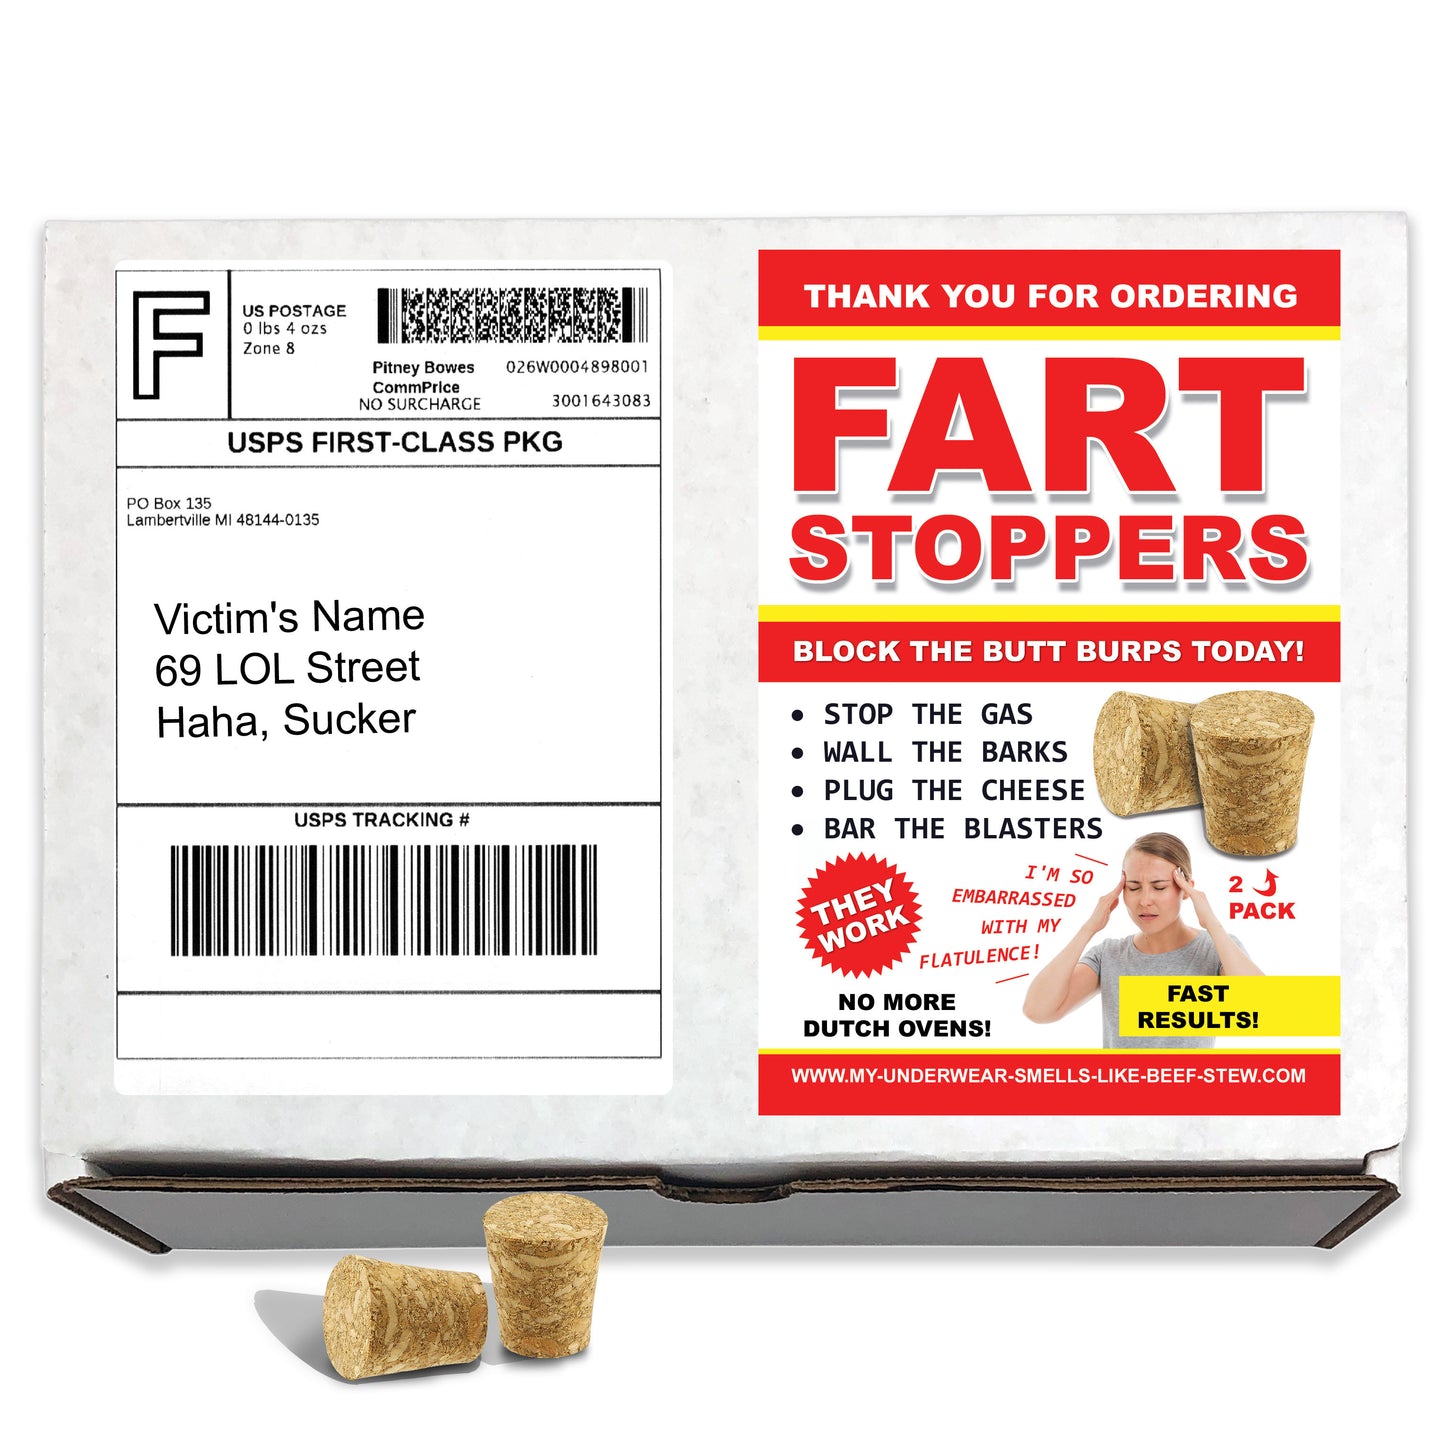 Fart Stoppers embarrassing prank box